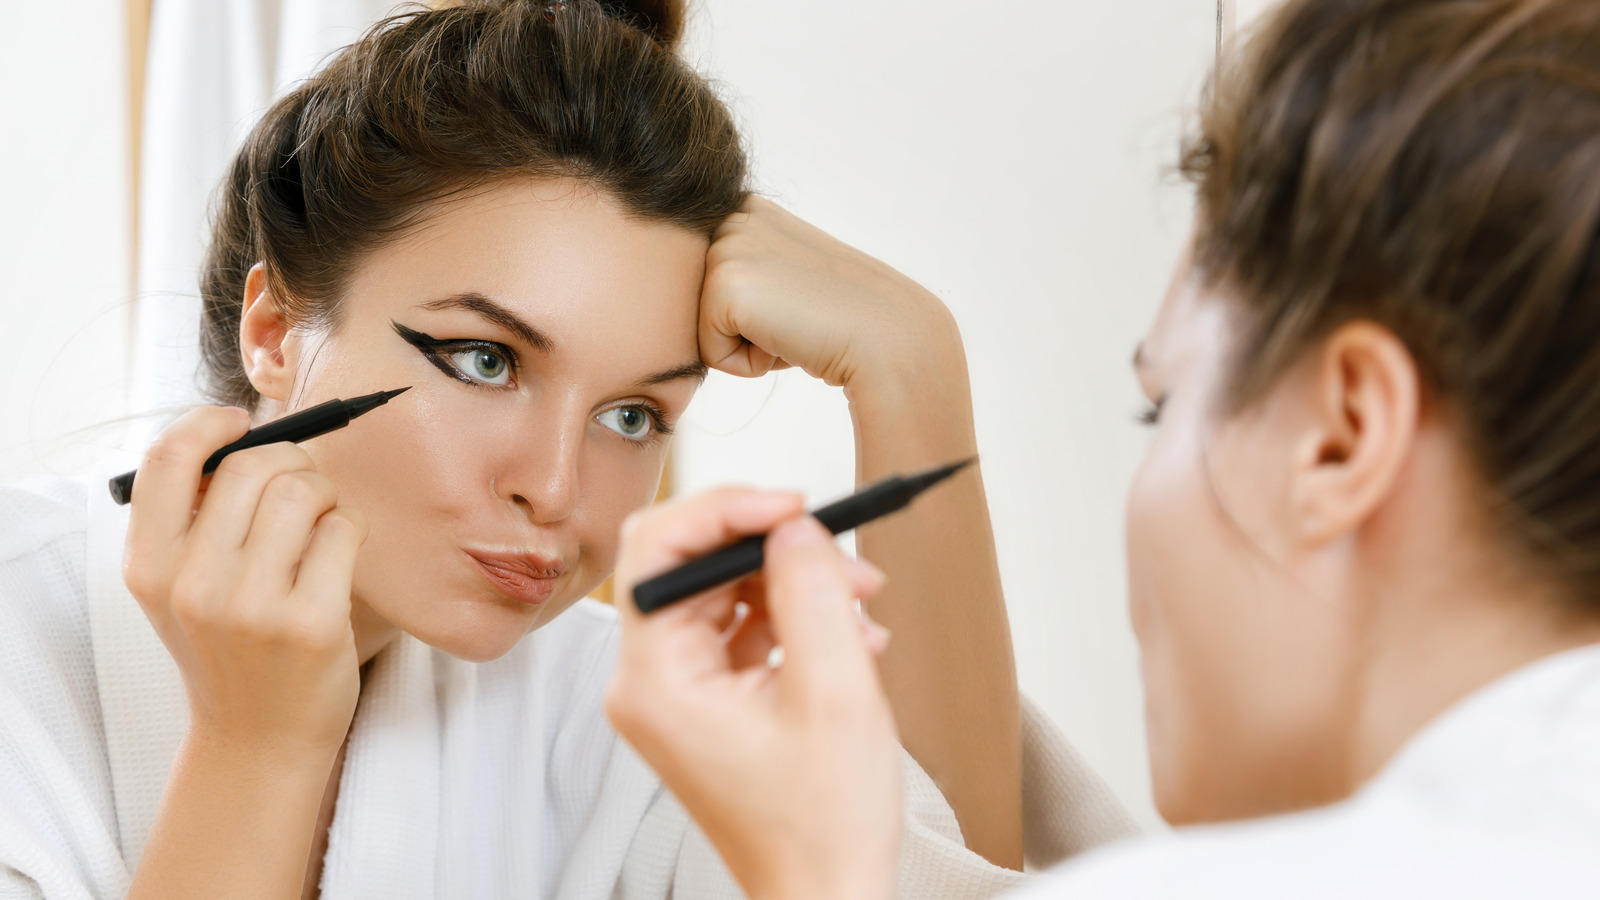 One Big Makeup Mistake Has Everything To Do With The Process And Not The Products